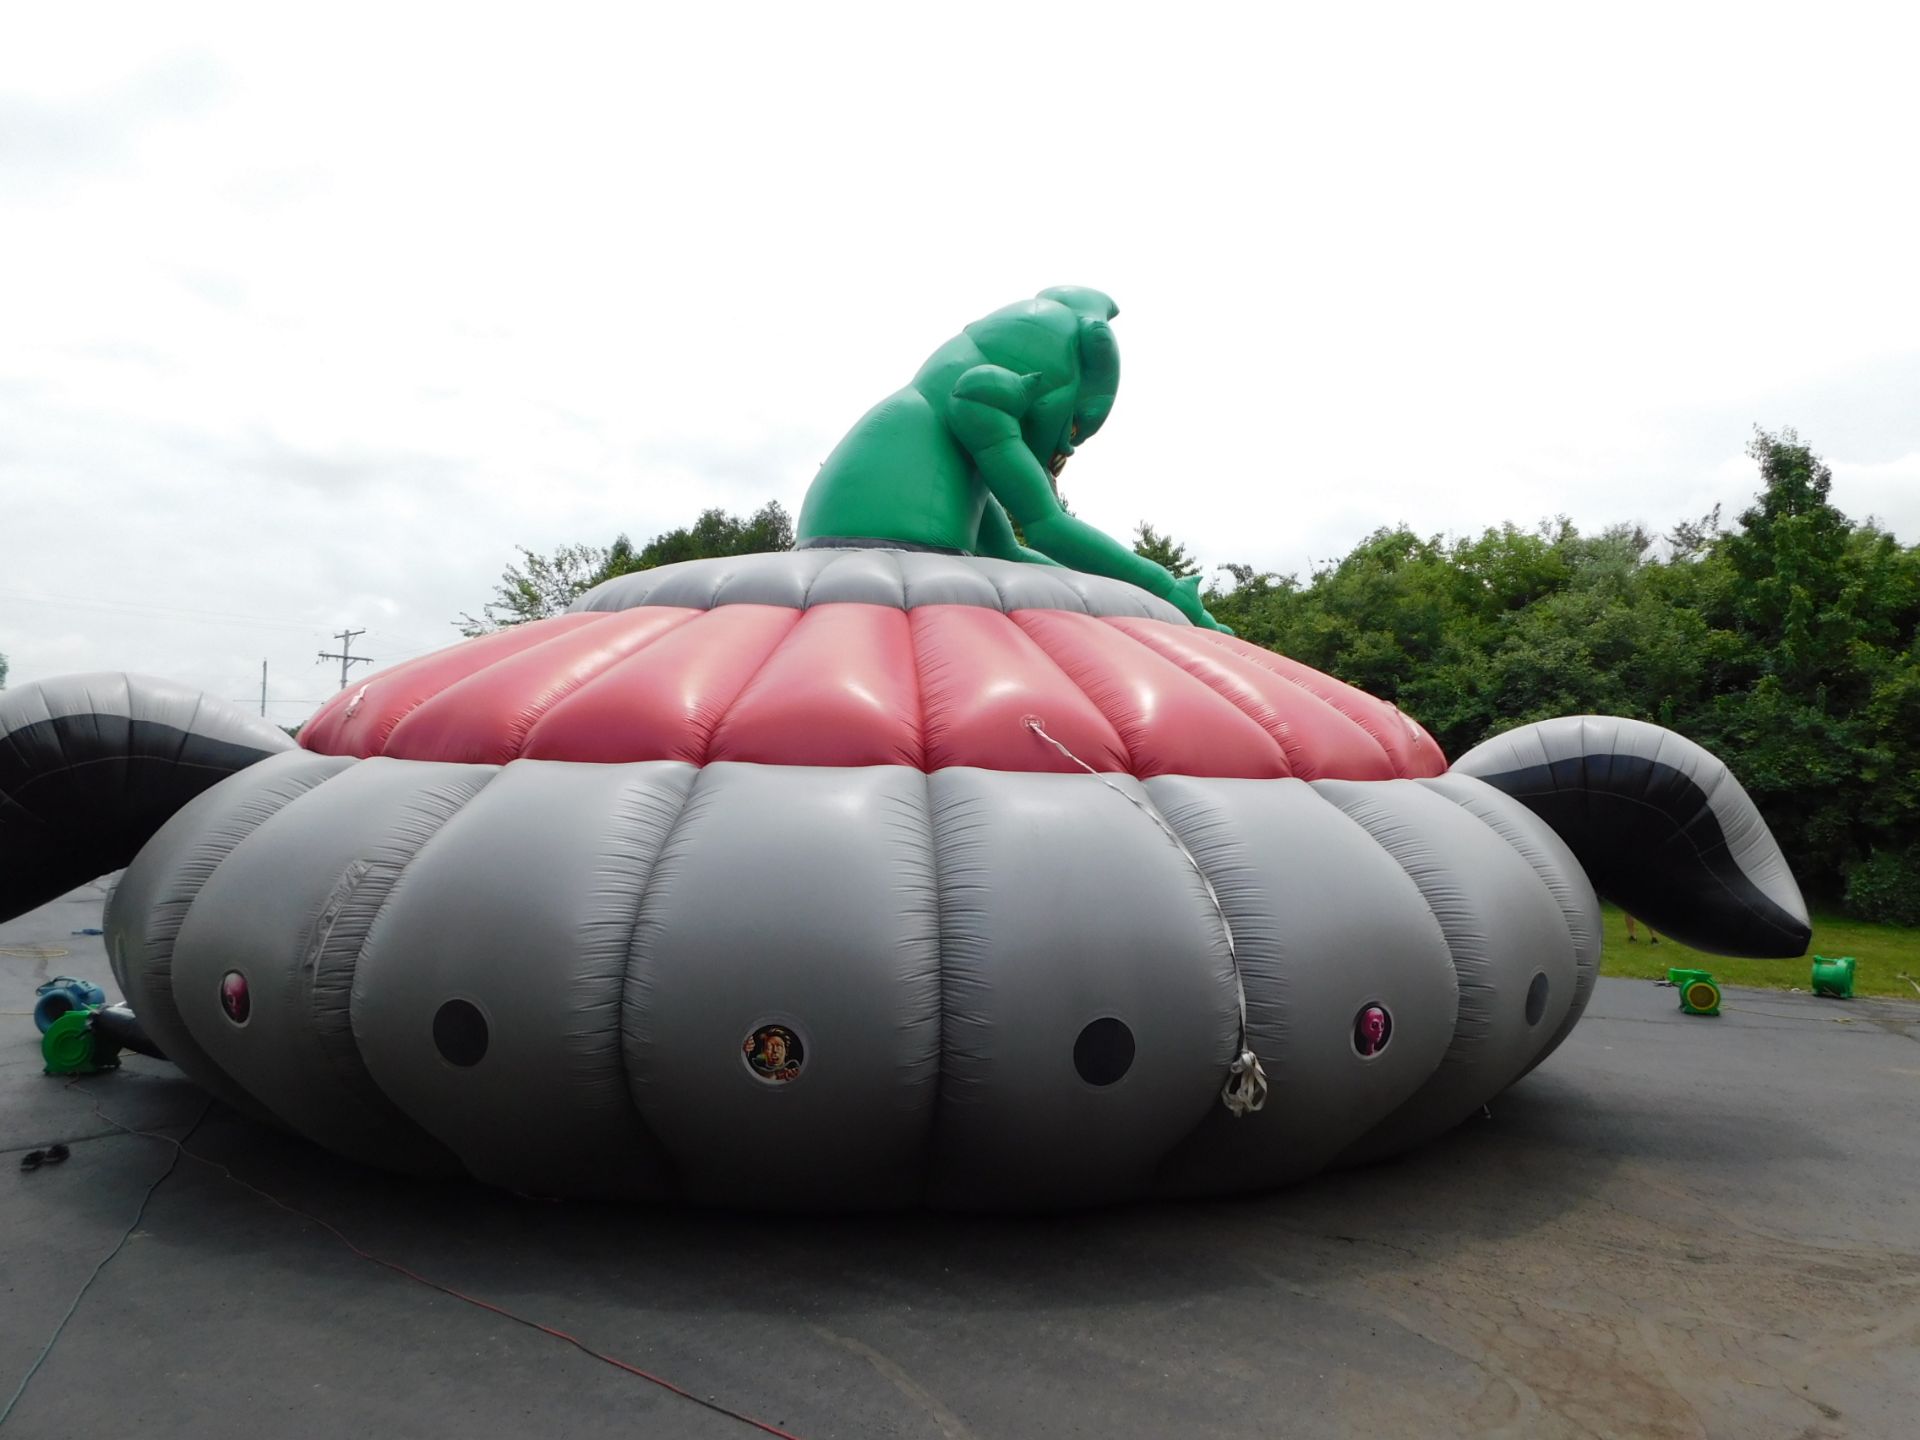 N-Flatables UFO Maze Inflatable Flying Saucer, (used for Laser tag-Guns Not Included) 40'UFO - Image 6 of 22